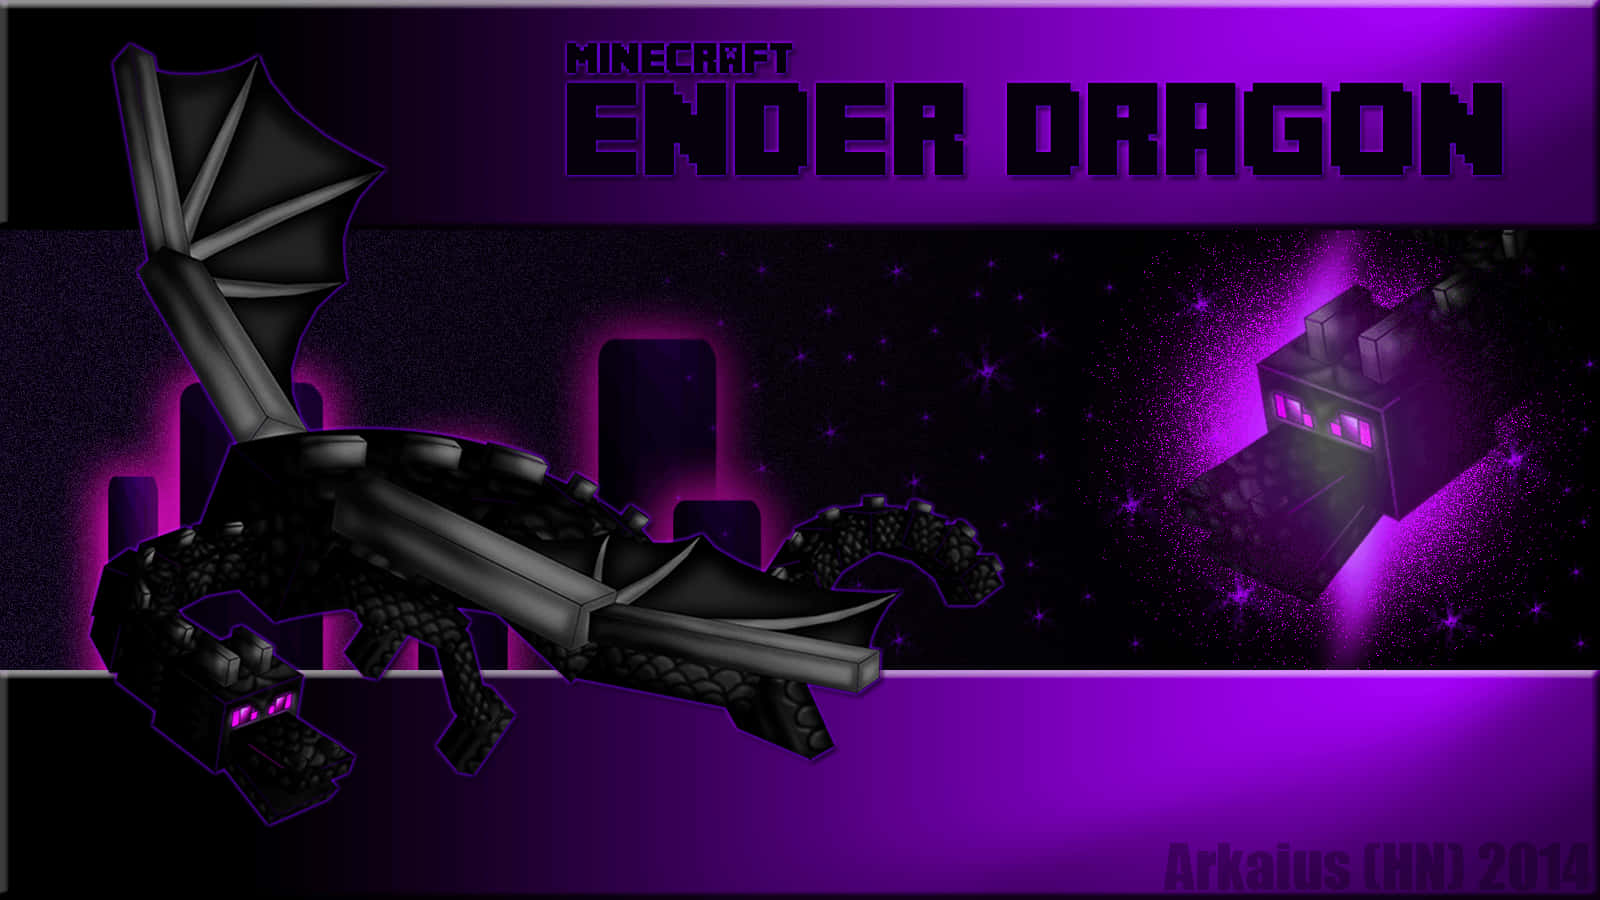 The Ender Dragon, the ultimate challenge in Minecraft Wallpaper